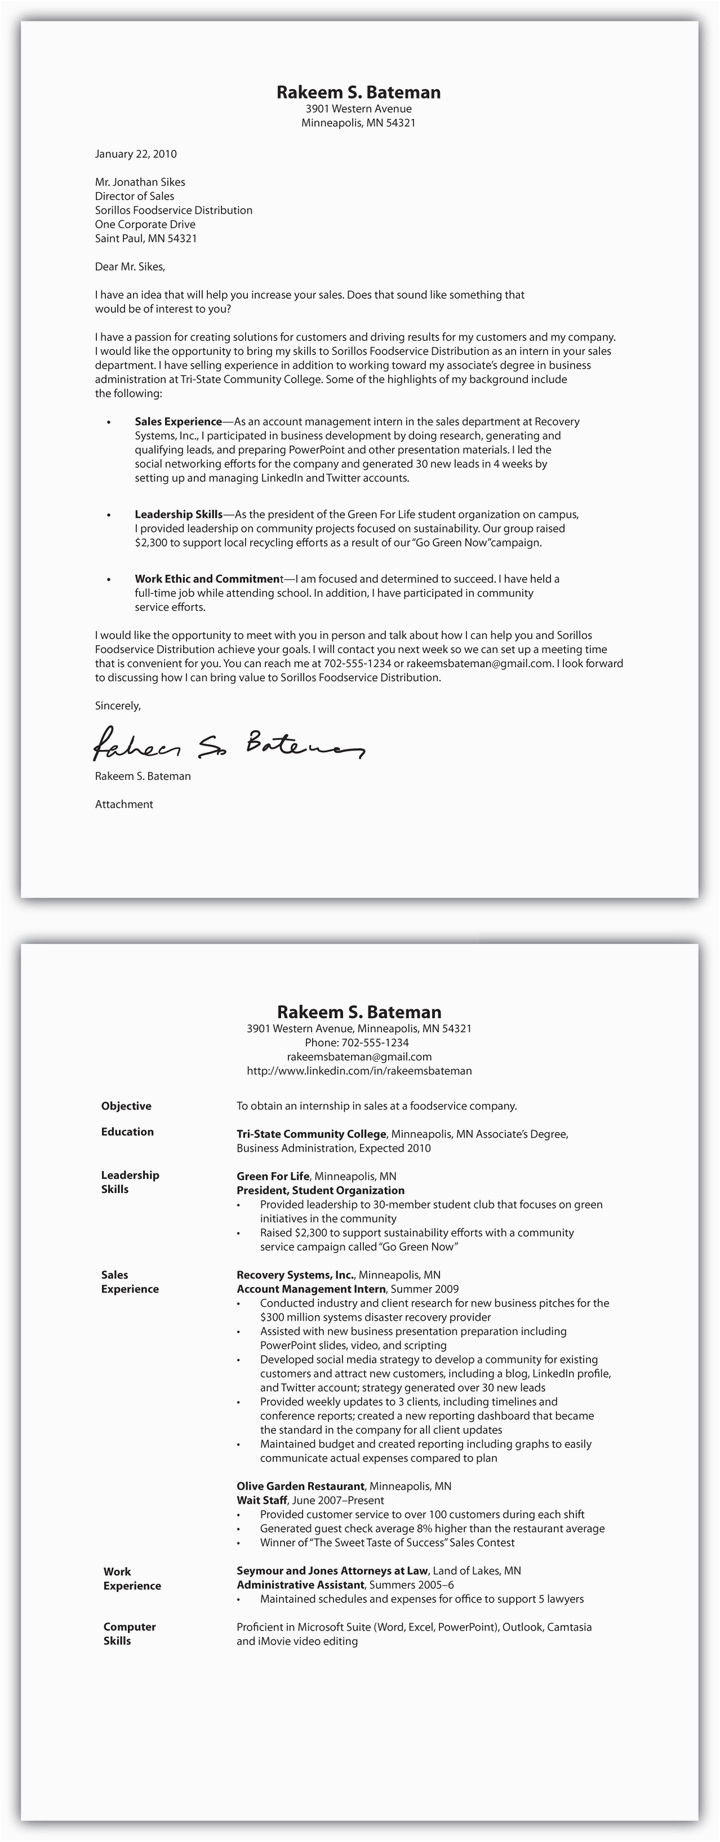 Sample Cover Letter and Resume In One Document Selling U Résumé and Cover Letter Essentials